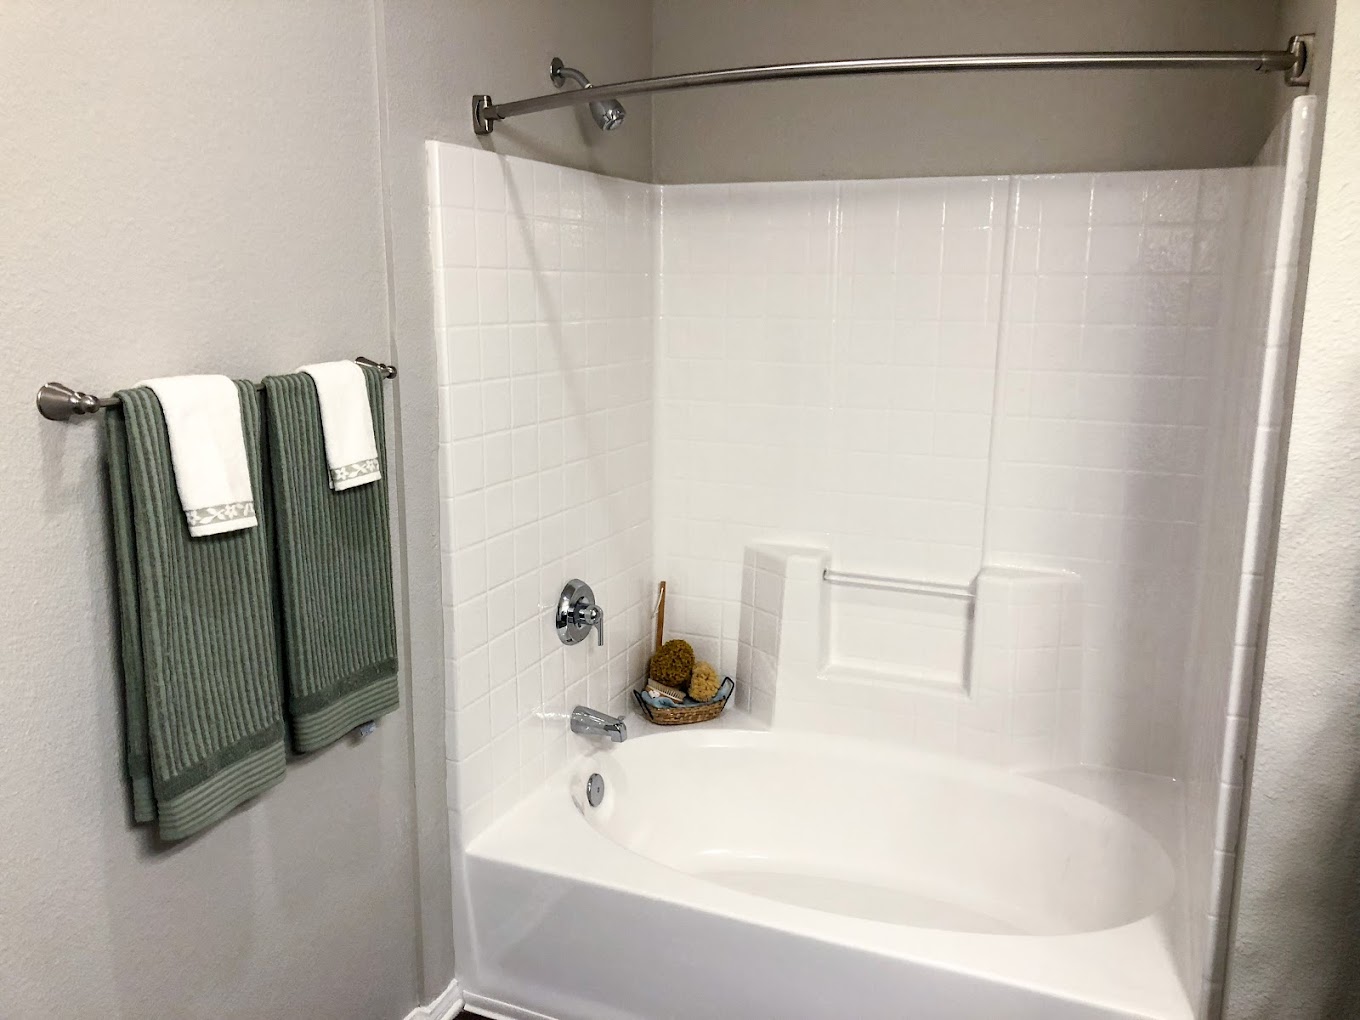 img avion at spectrum apartments for rent san diego ca renew bathroom 02 AvenueWest Global